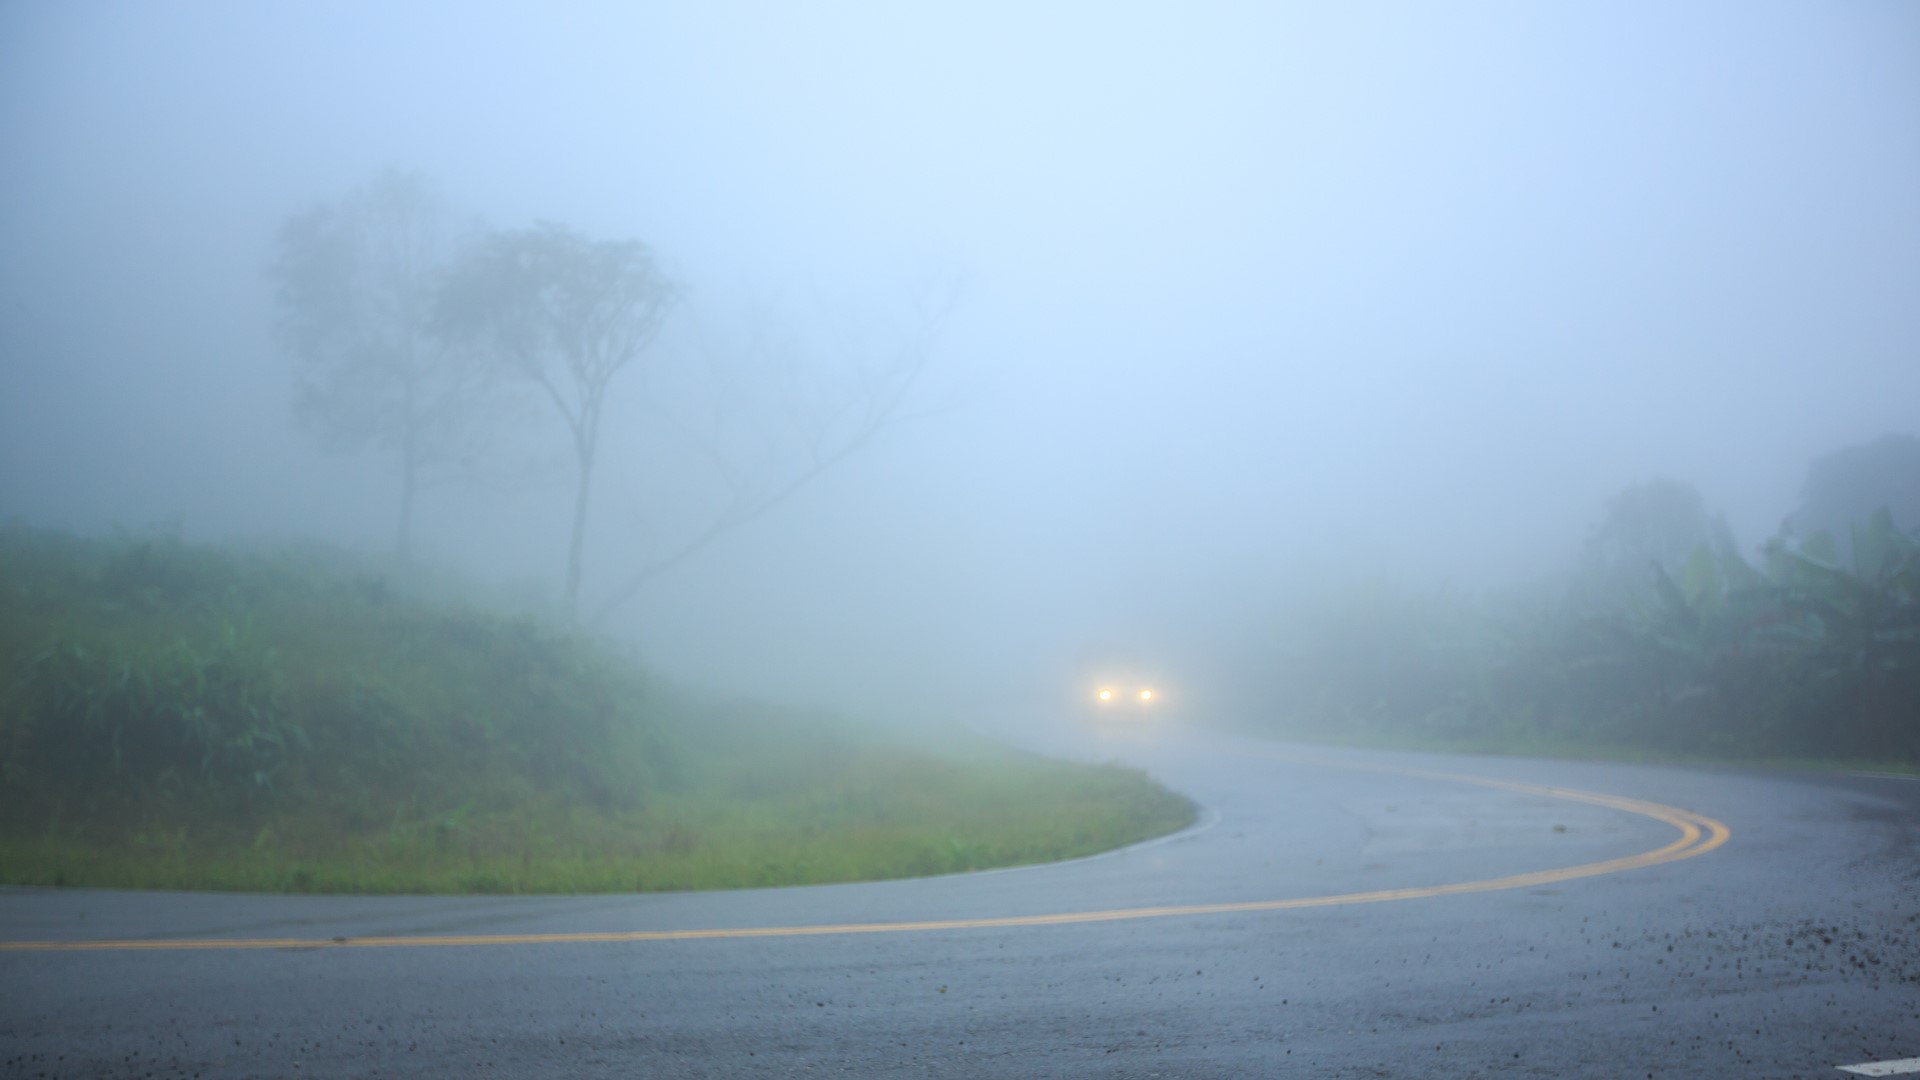 If you've lived in Northern California long enough, chances are you've encountered dense fog. So we've compiled a list of 5 things to know about driving through fog.